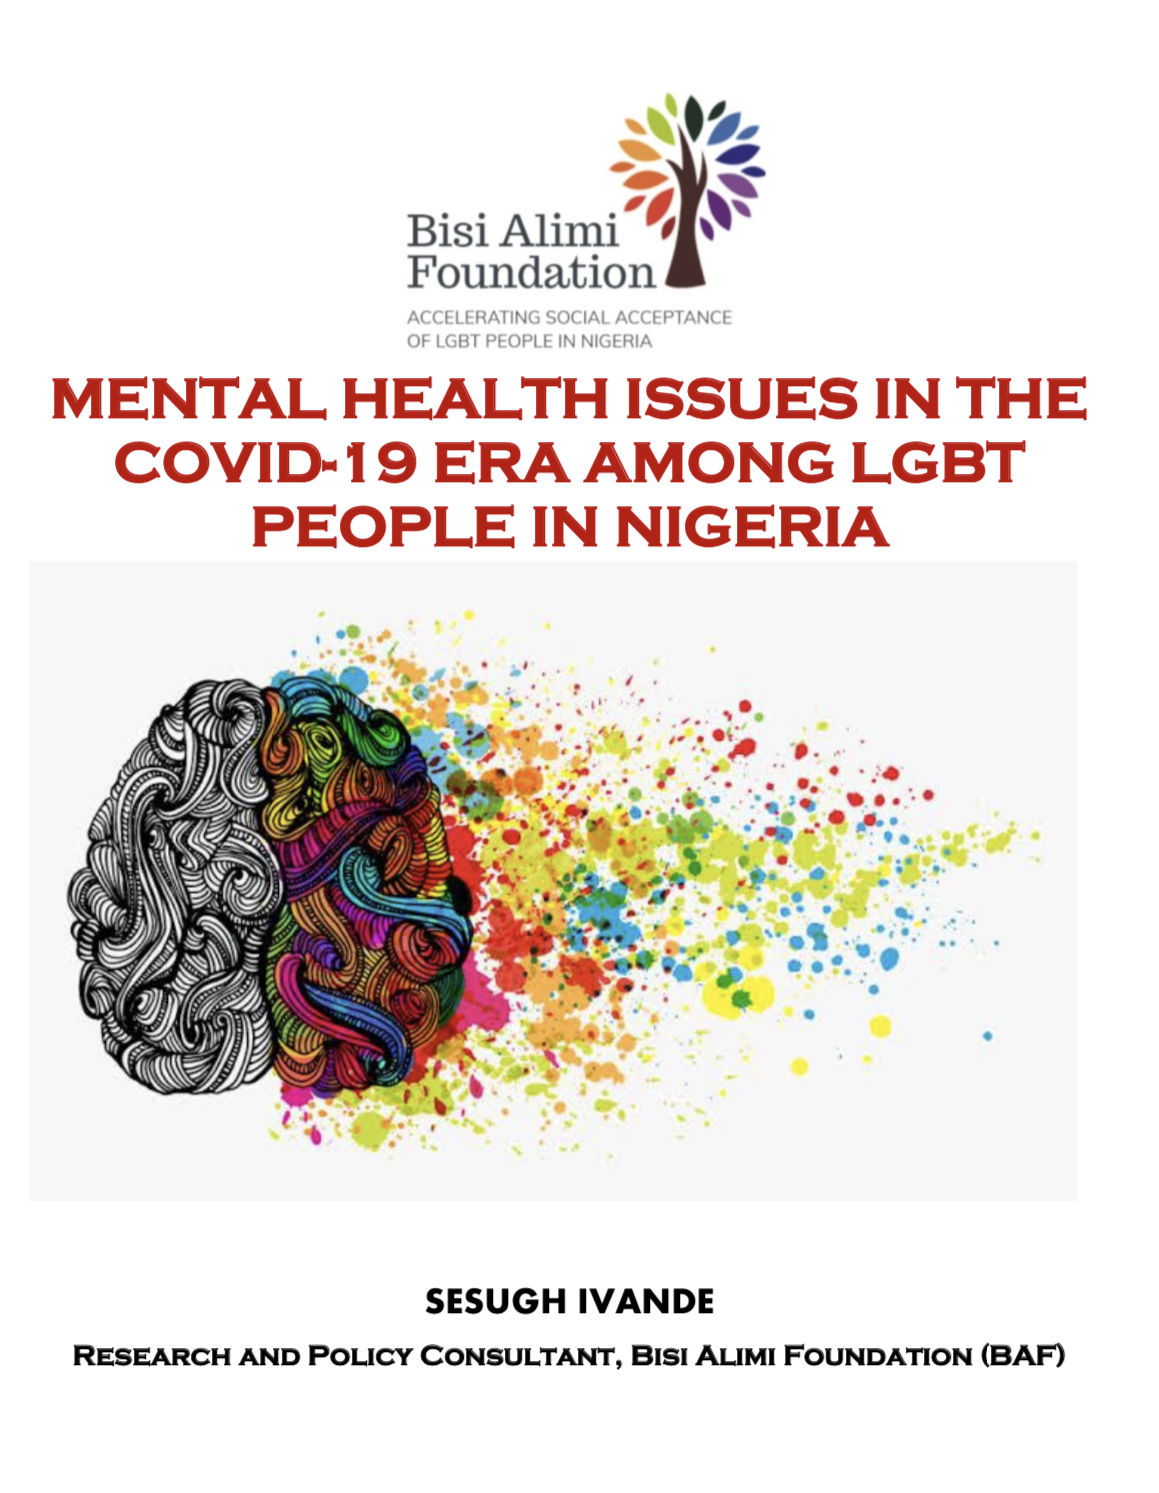 Mental Health Issues in the COVID-19 Era Among LGBT People in Nigeria